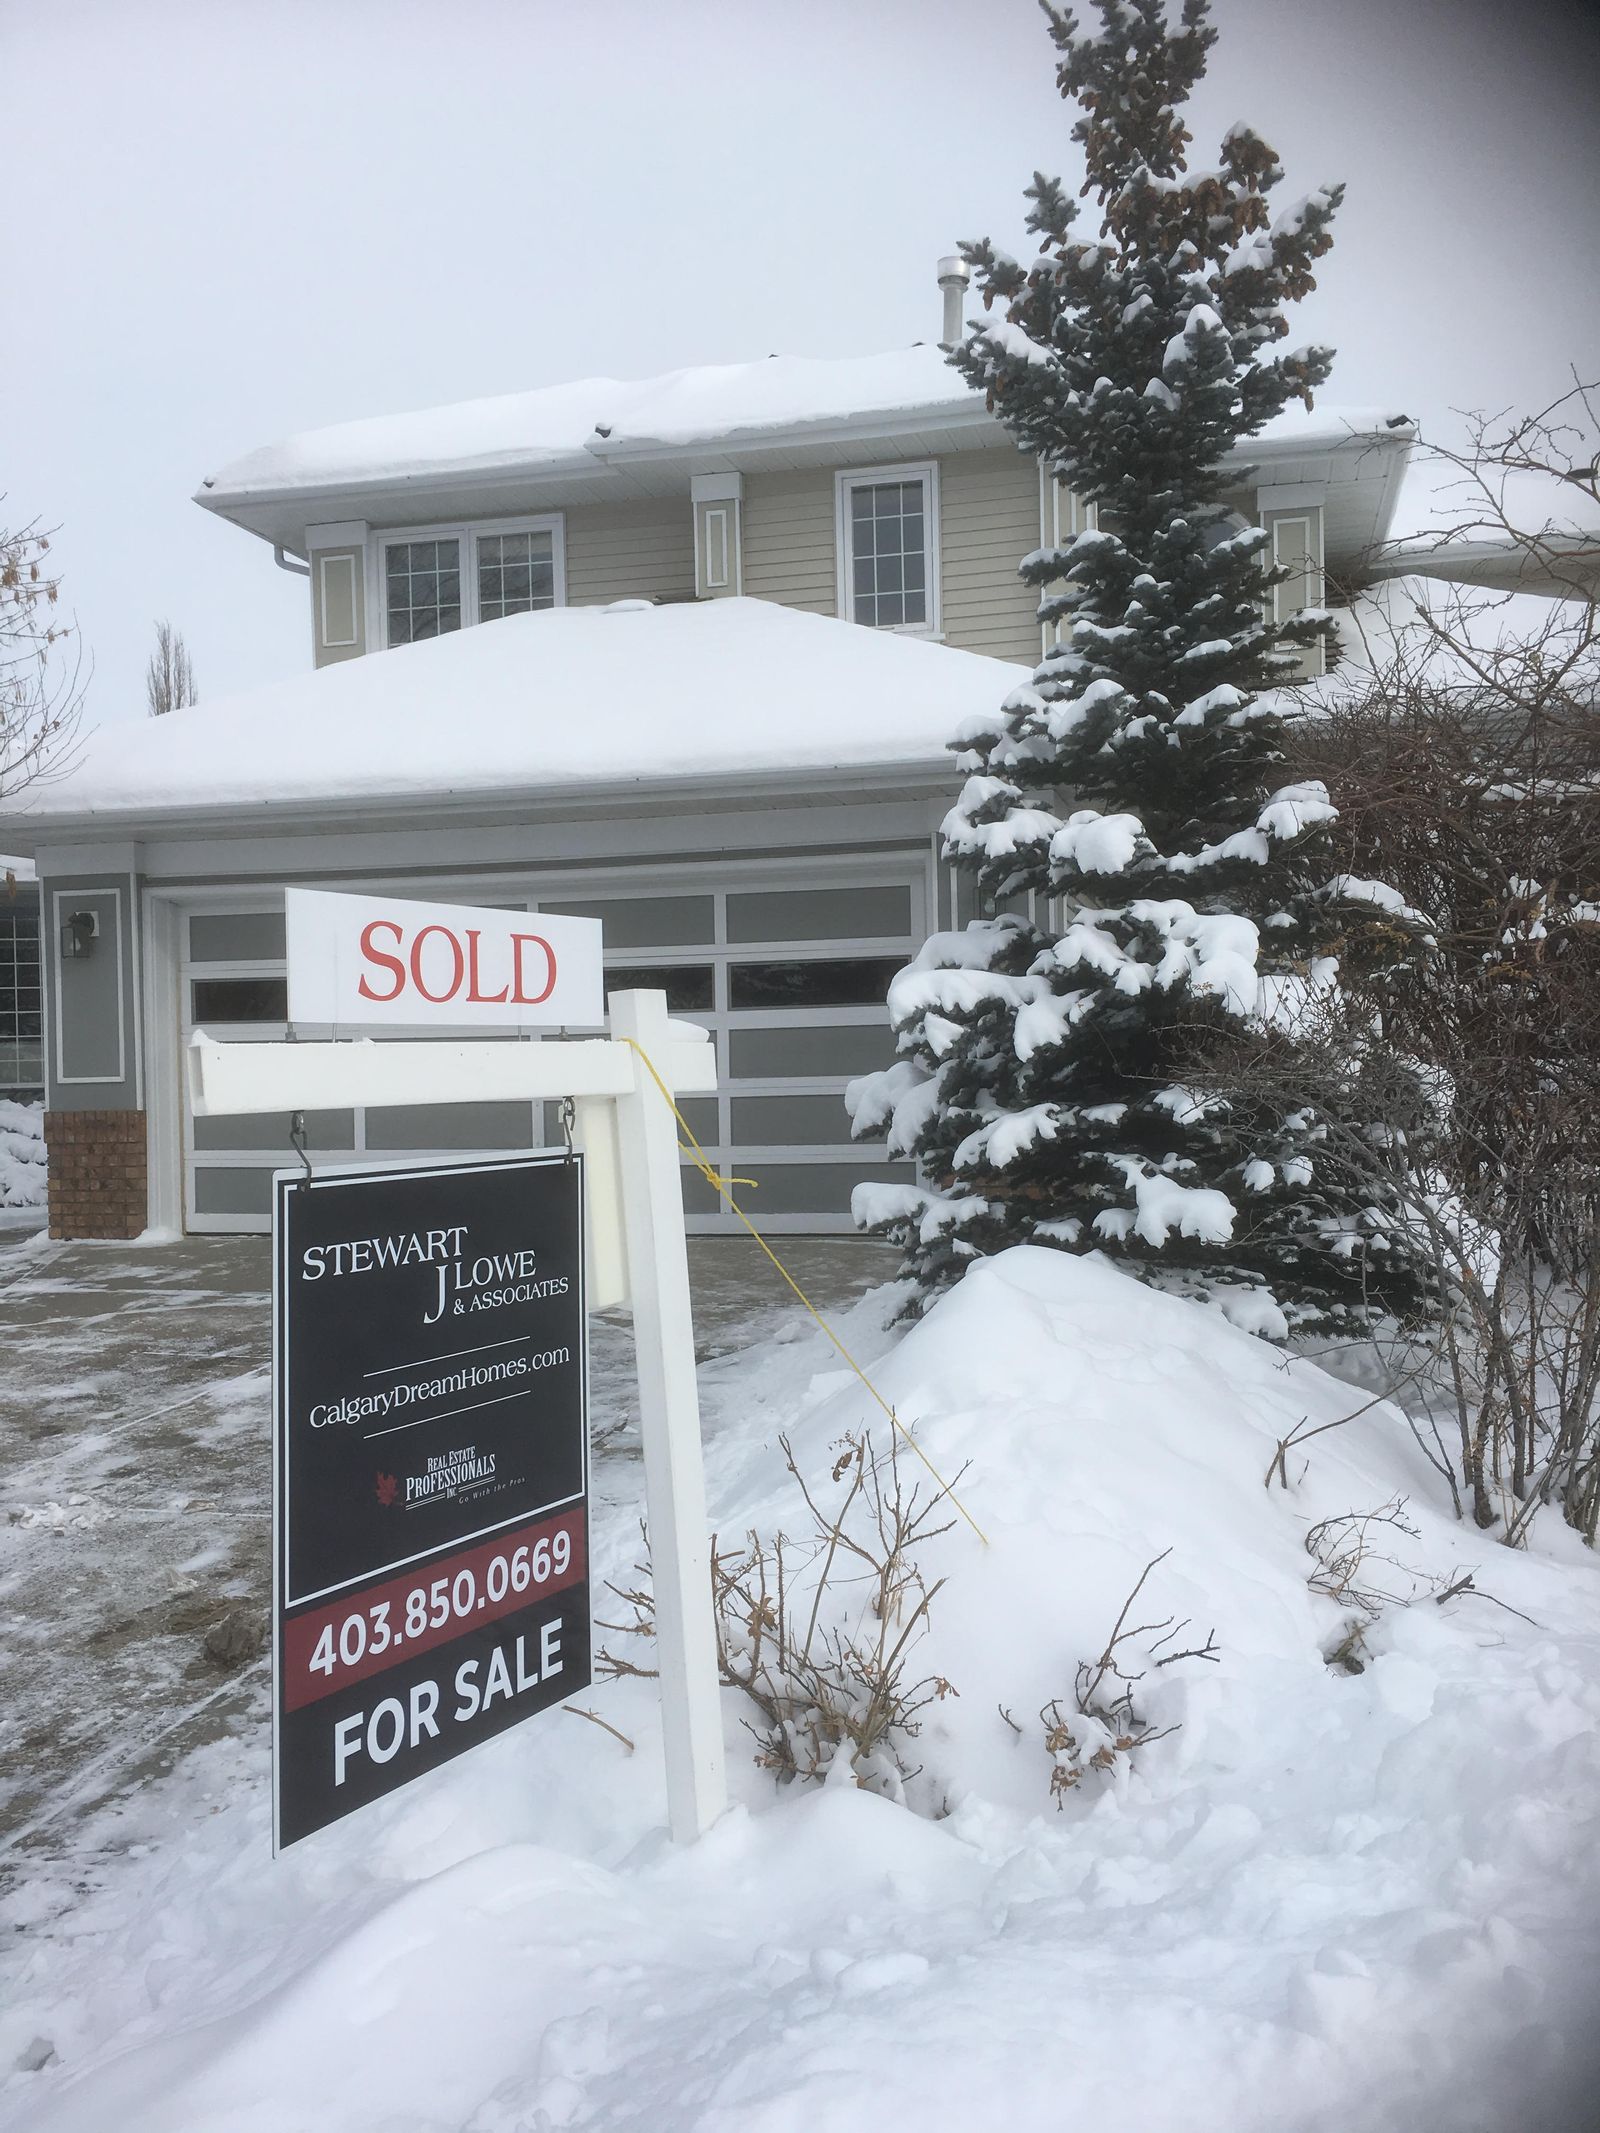 CREB: Persistent sellers' market conditions drive up prices